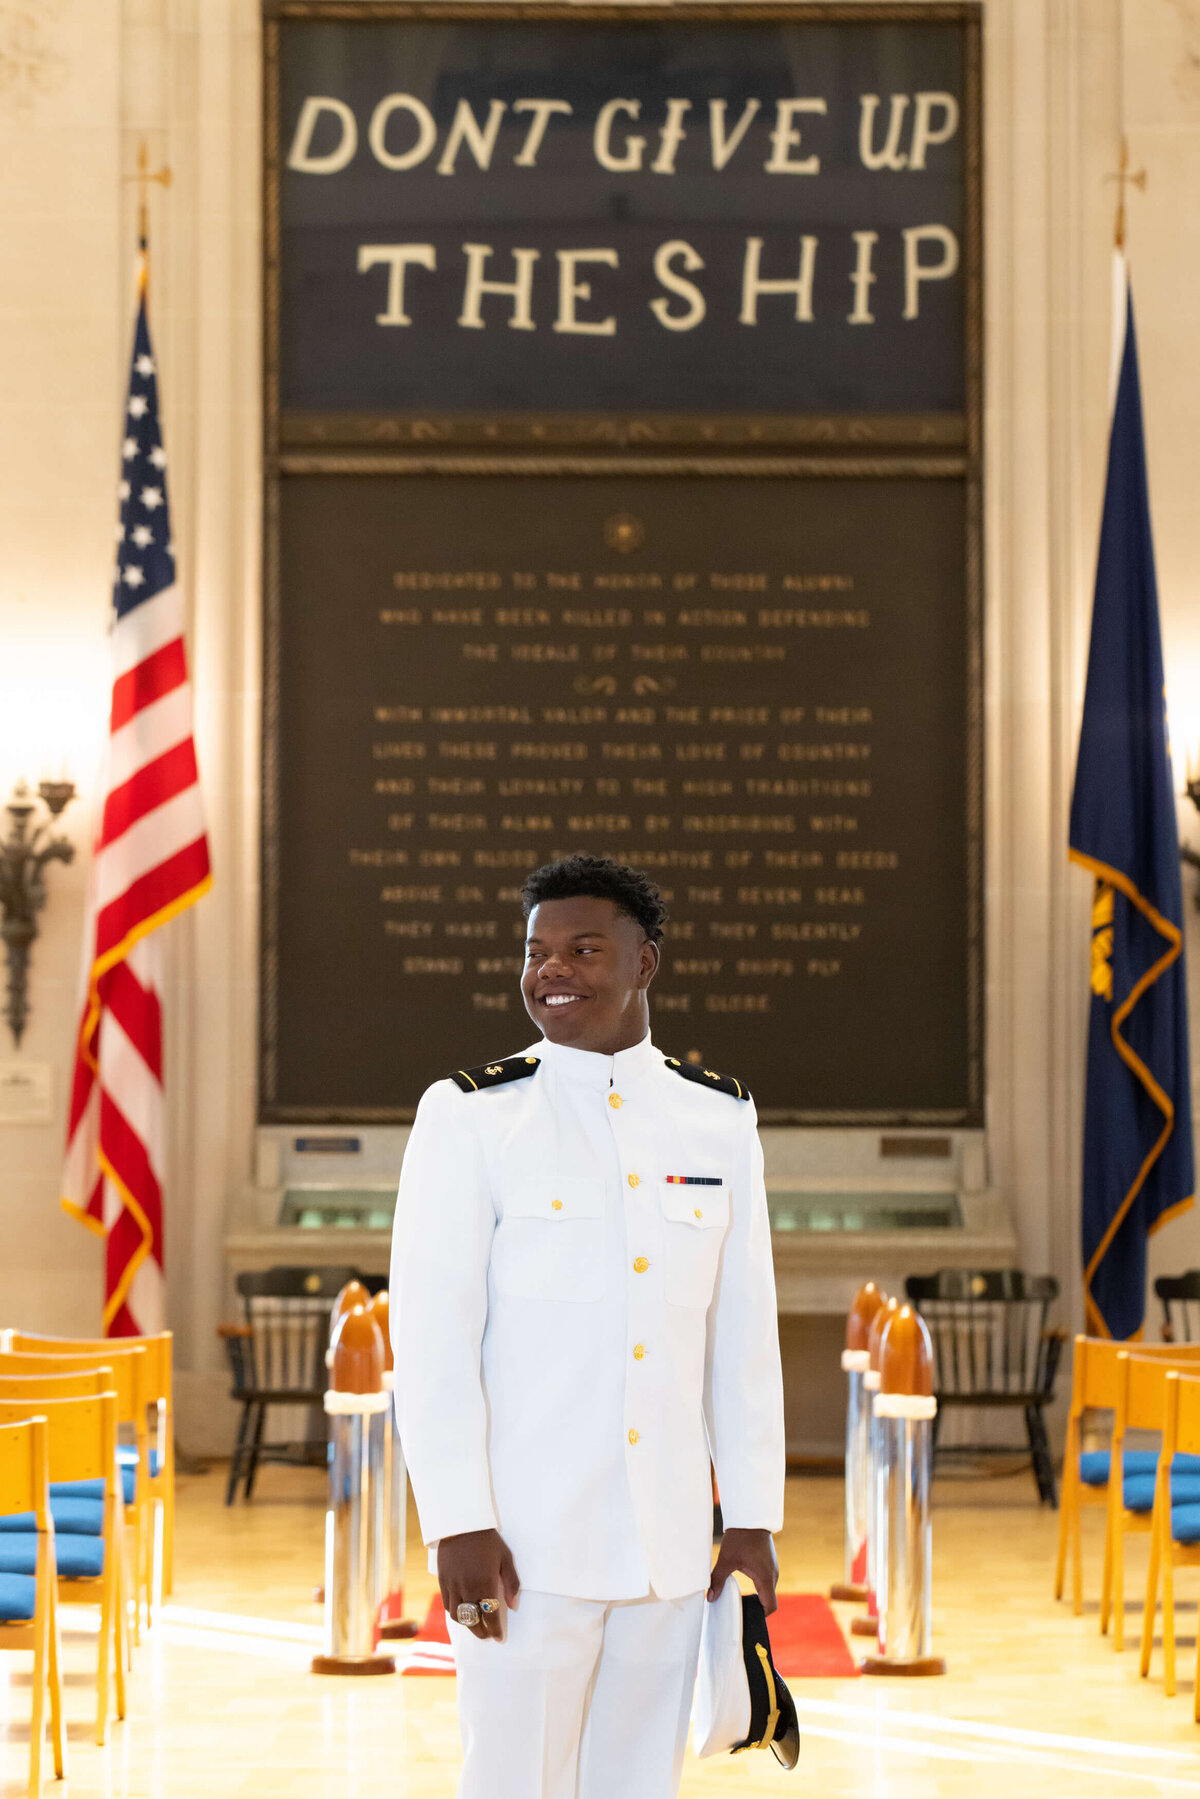 Midshipman Sailor in US Navy Portrait in Memorial Hall at the Naval Academy in Annapolis, Maryland.